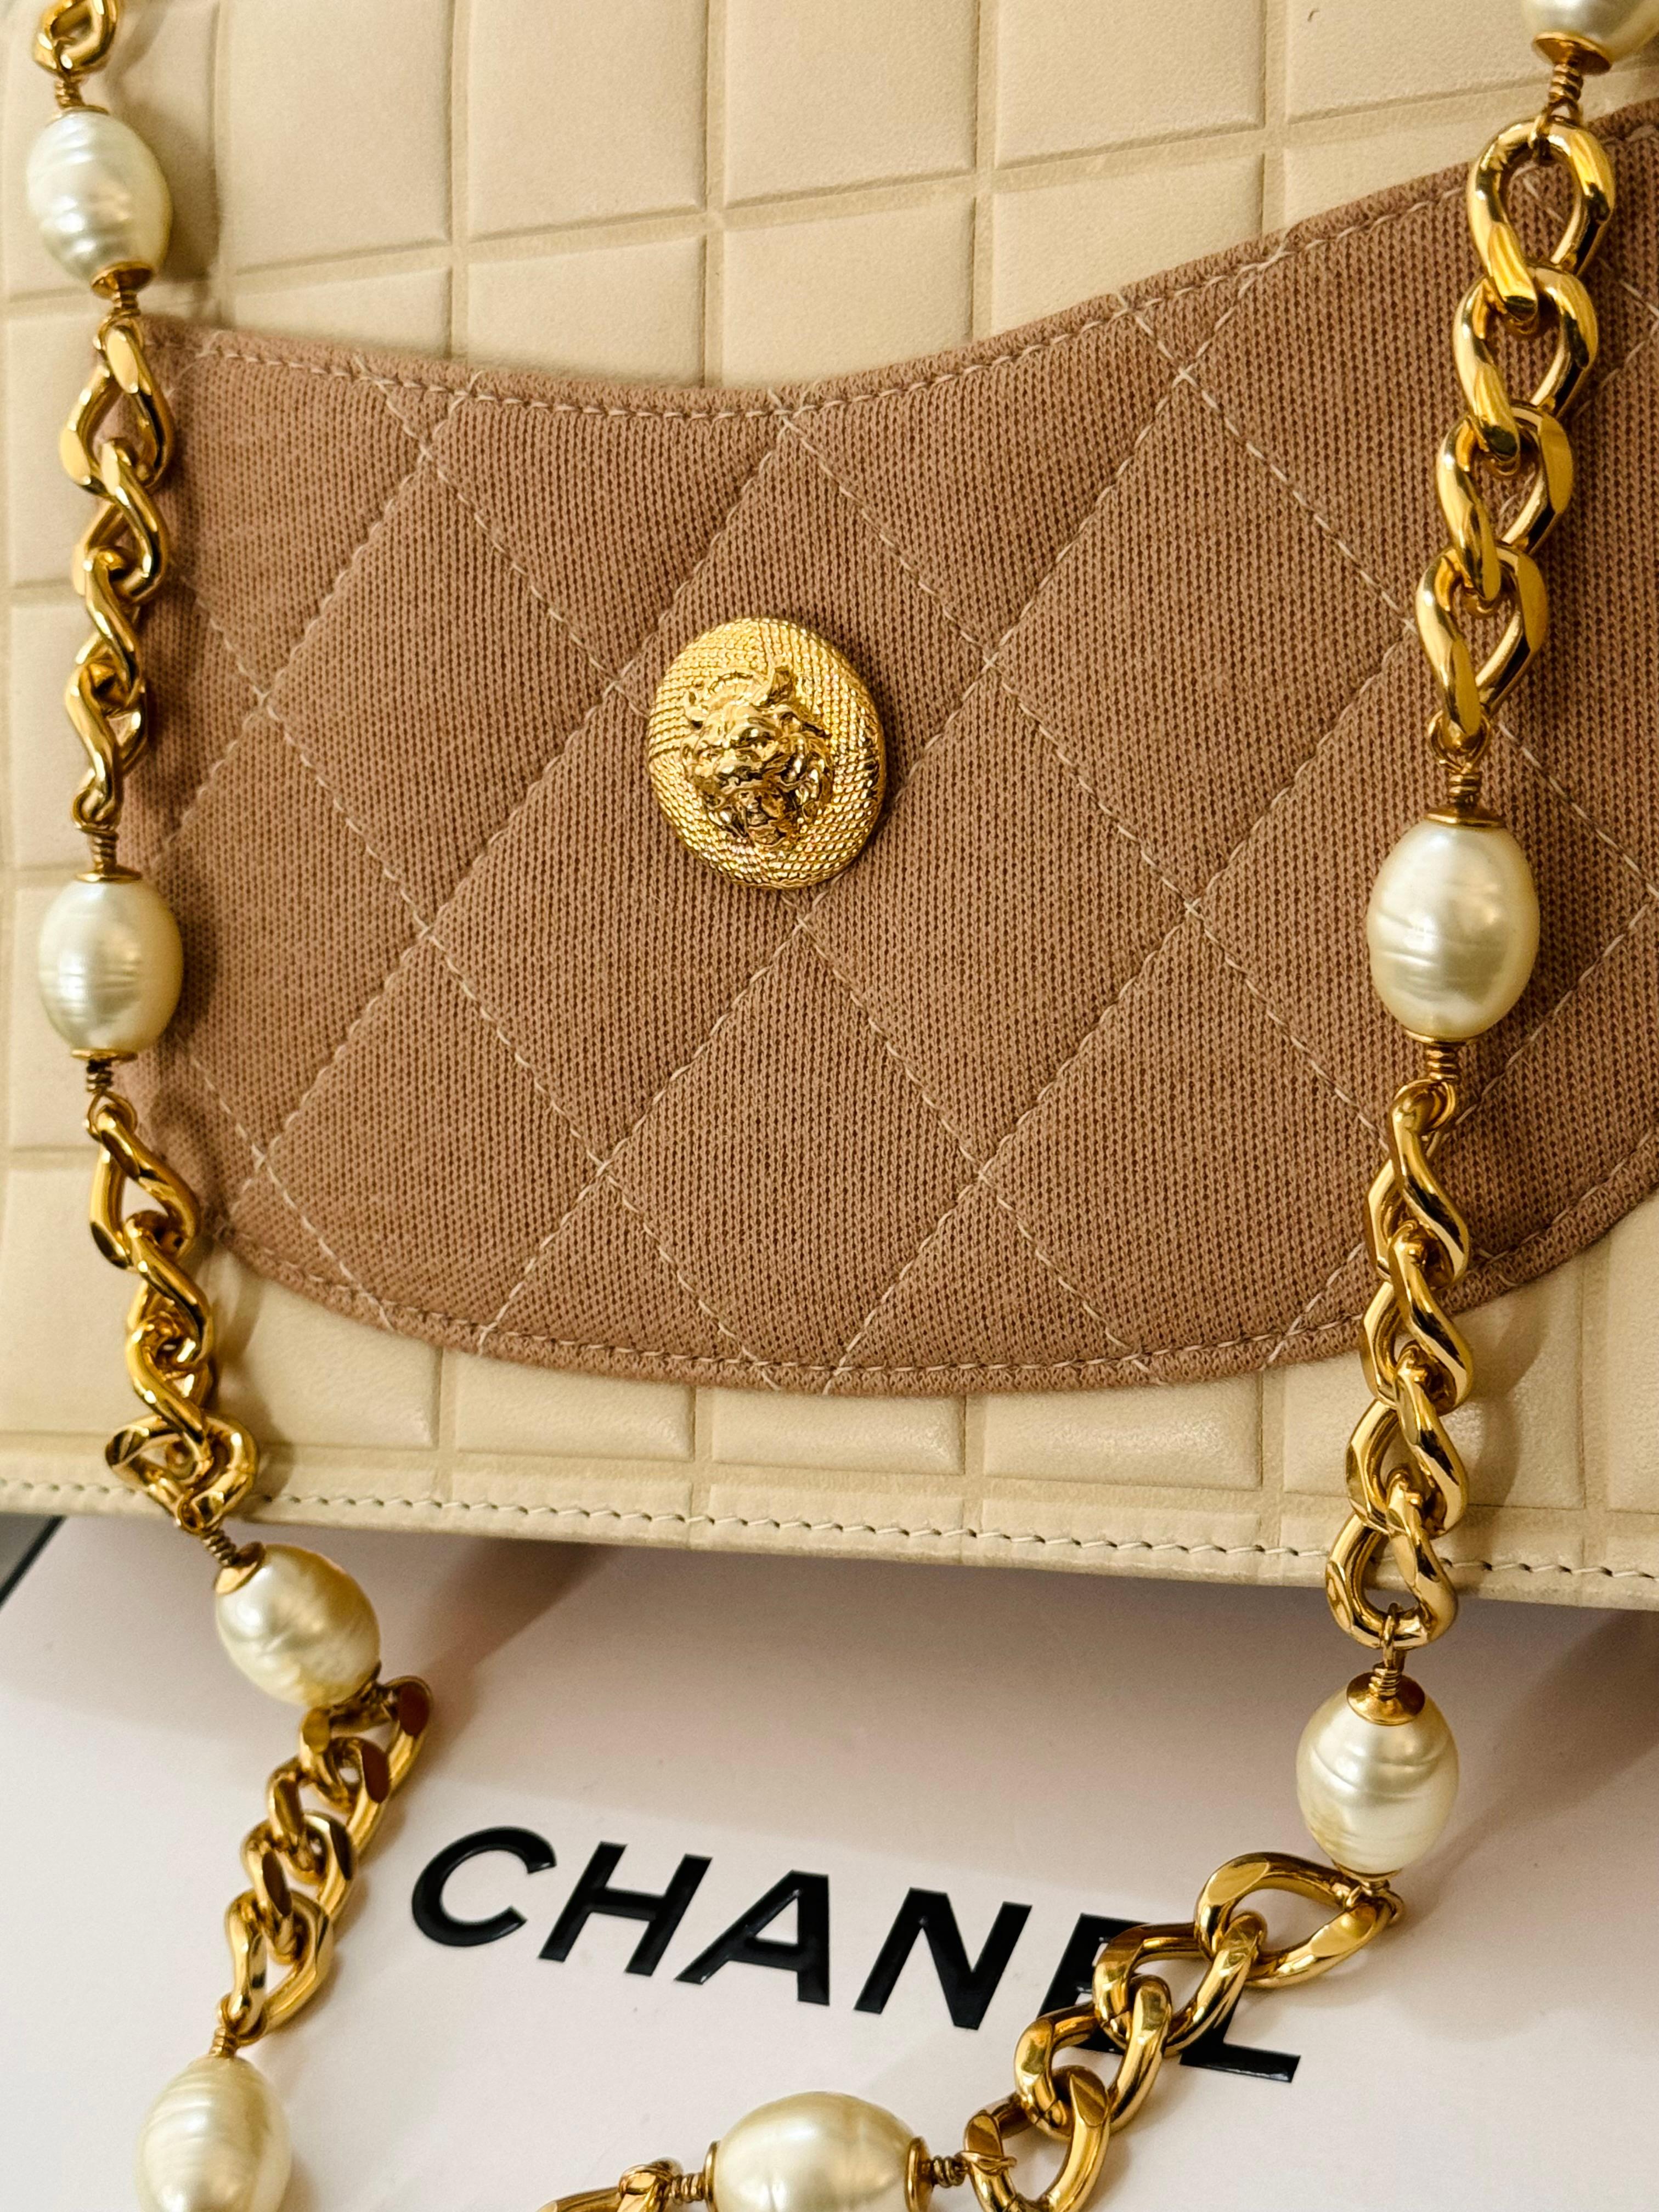 Chanel 2001 runway flap bag  For Sale 2